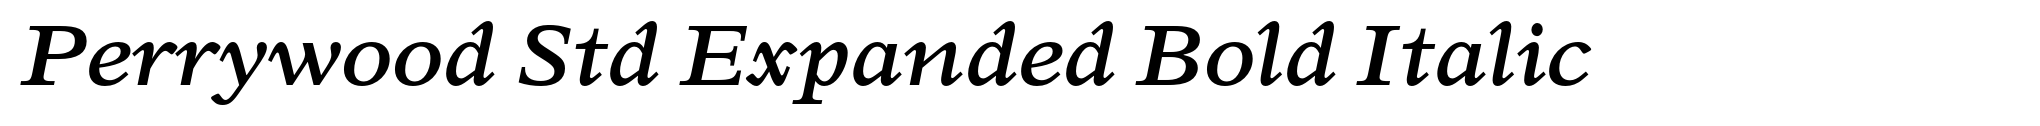 Perrywood Std Expanded Bold Italic image